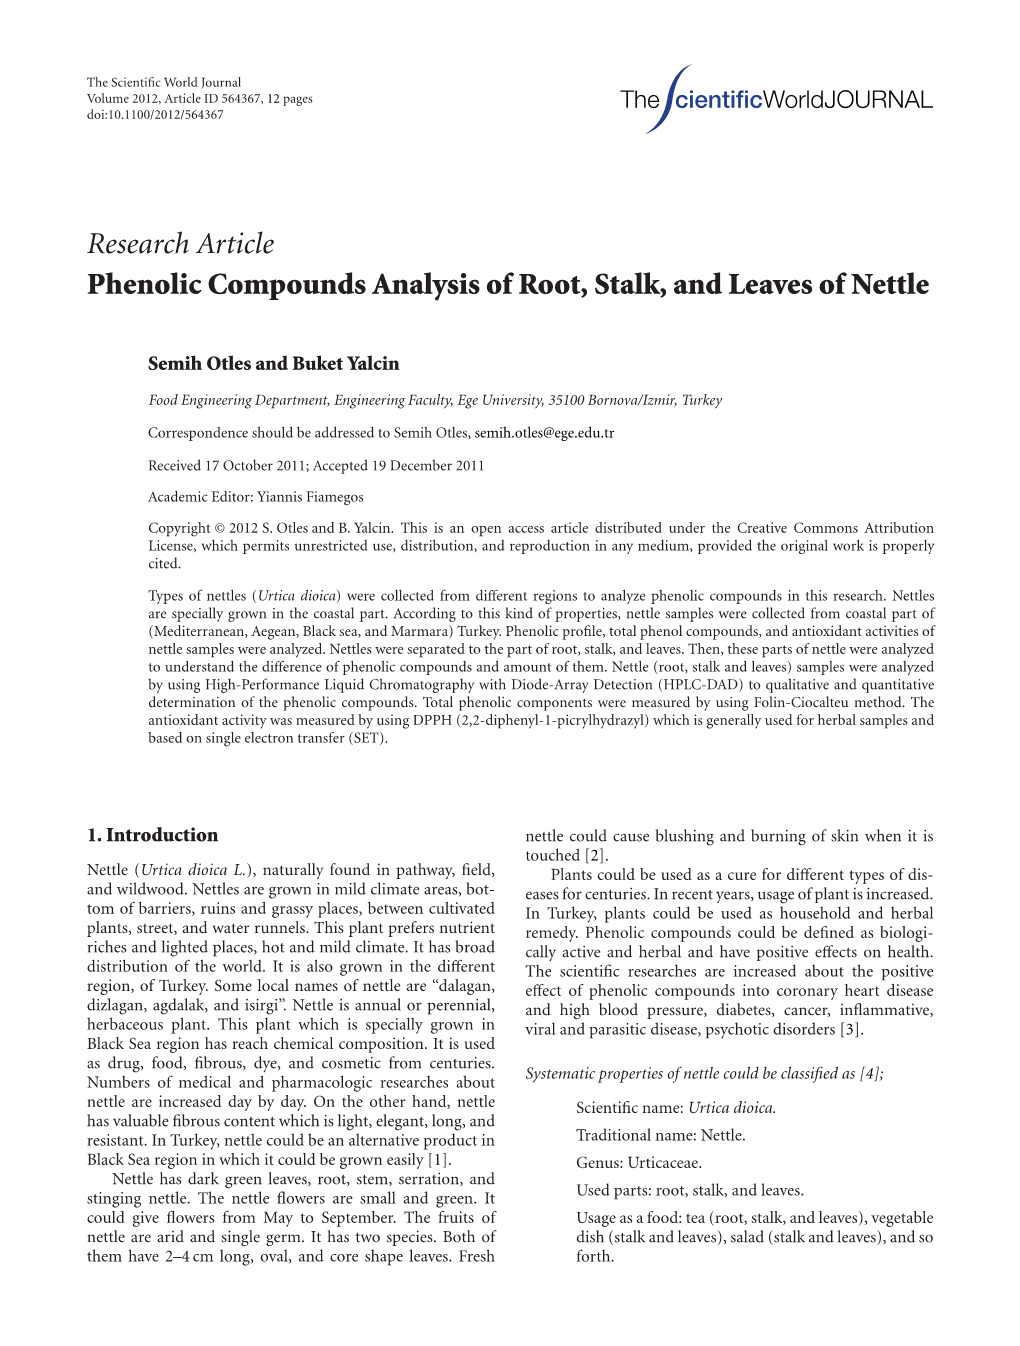 Phenolic Compounds Analysis of Root, Stalk, and Leaves of Nettle